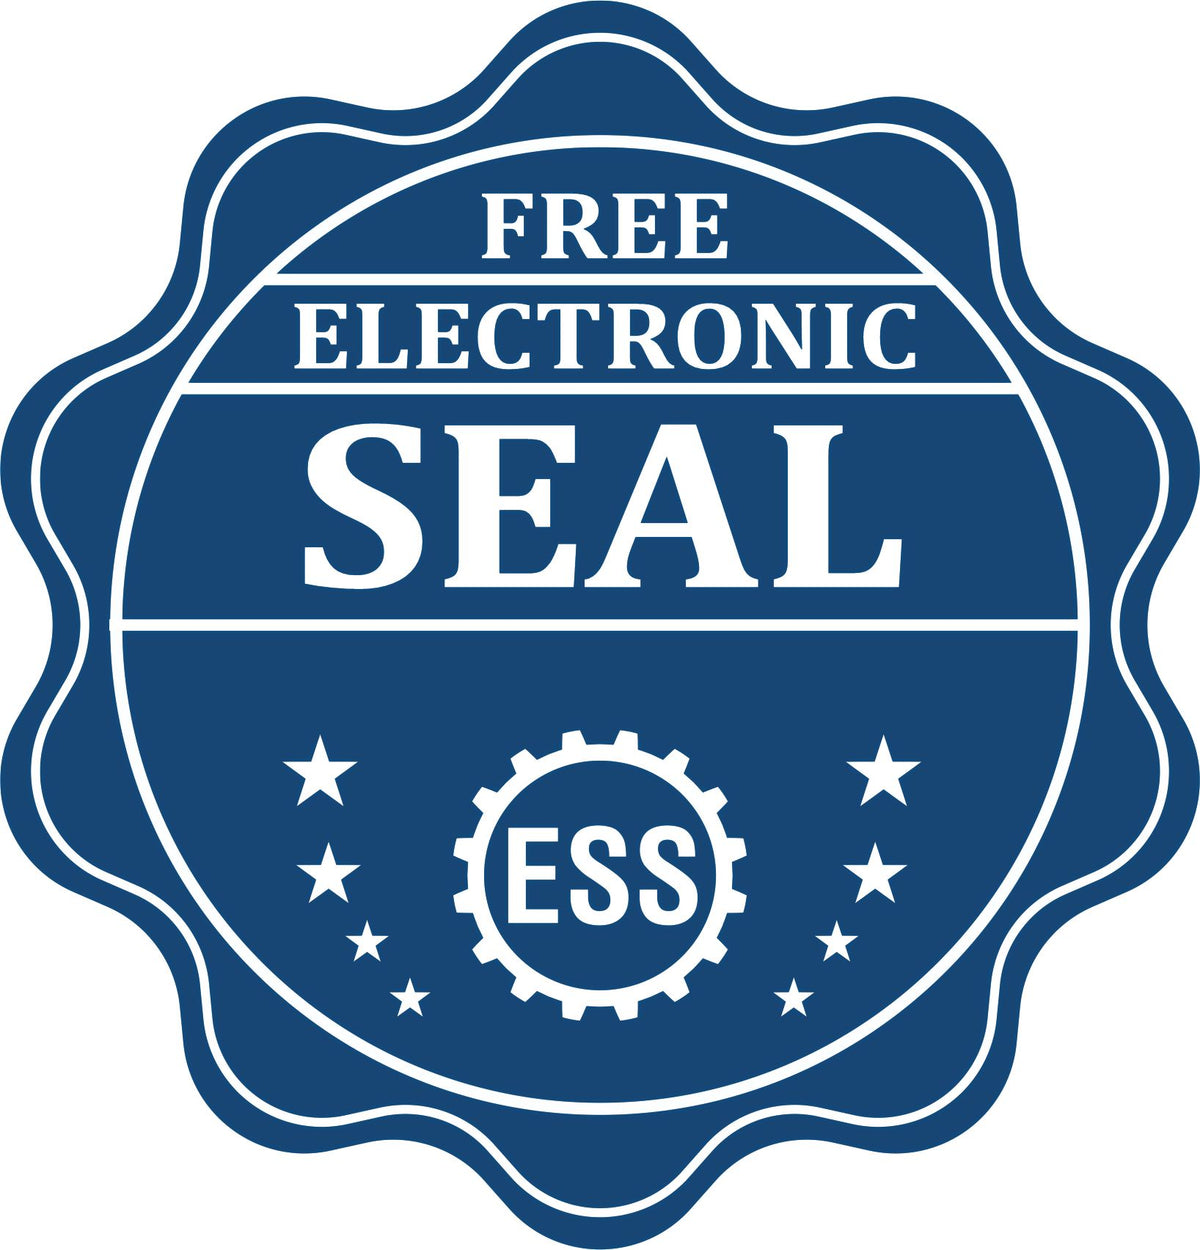 A badge showing a free electronic seal for the State of Arkansas Extended Long Reach Geologist Seal with stars and the ESS gear on the emblem.